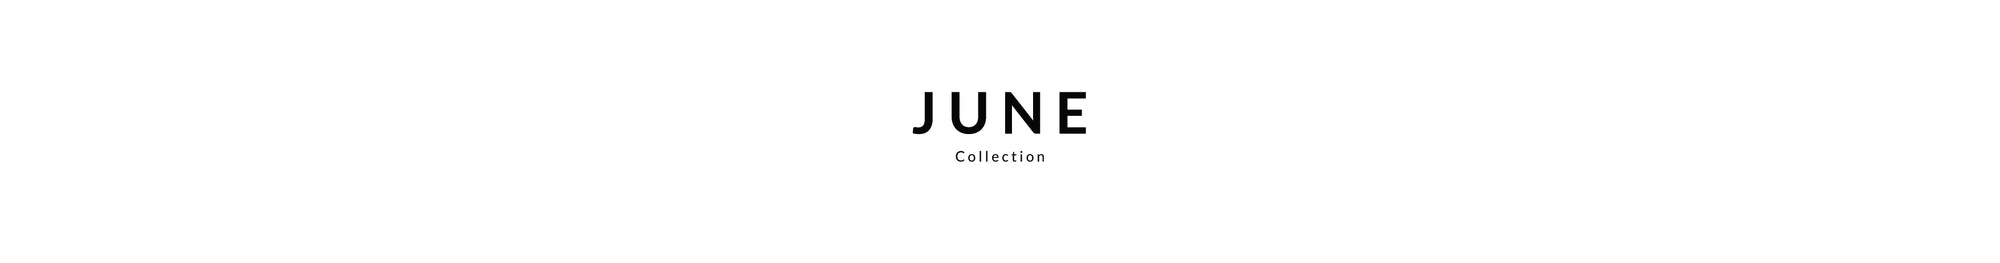 JUNE Collection